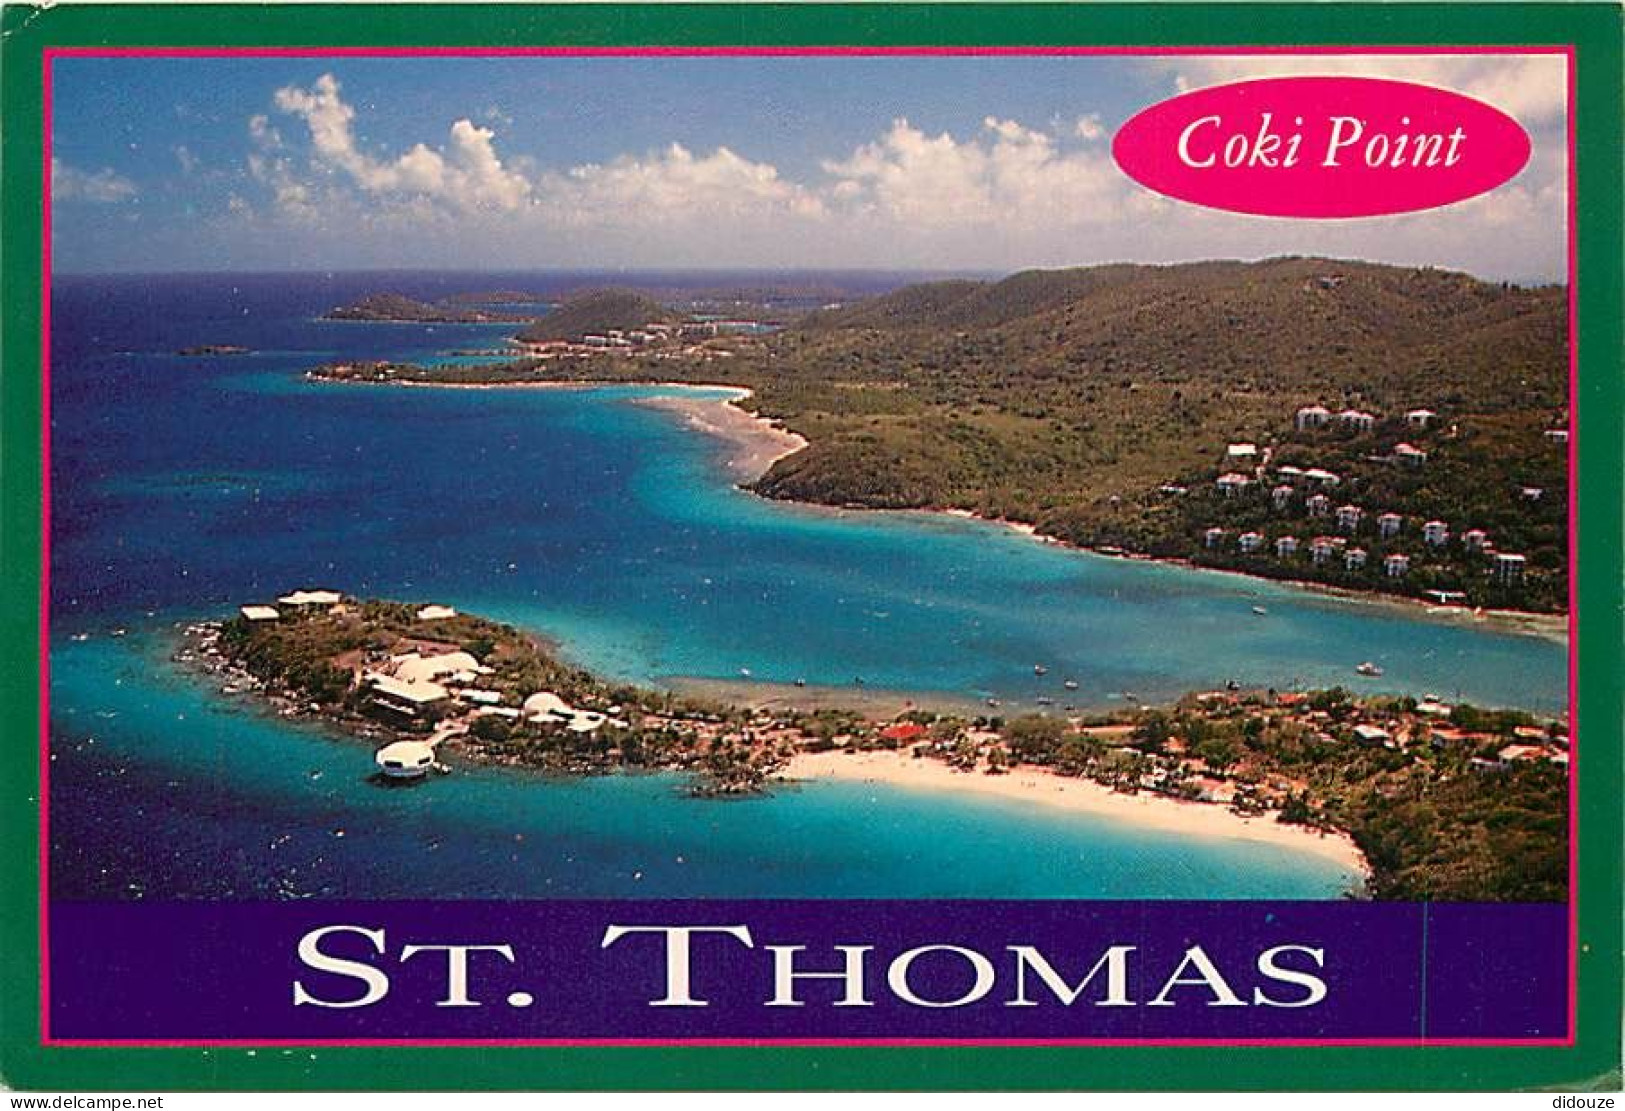 Antilles - Iles Vierges Américaines - U S Virgin Islands - St Thomas - Coki Point Beach And The Coral World Undenwater O - Islas Vírgenes Americanas